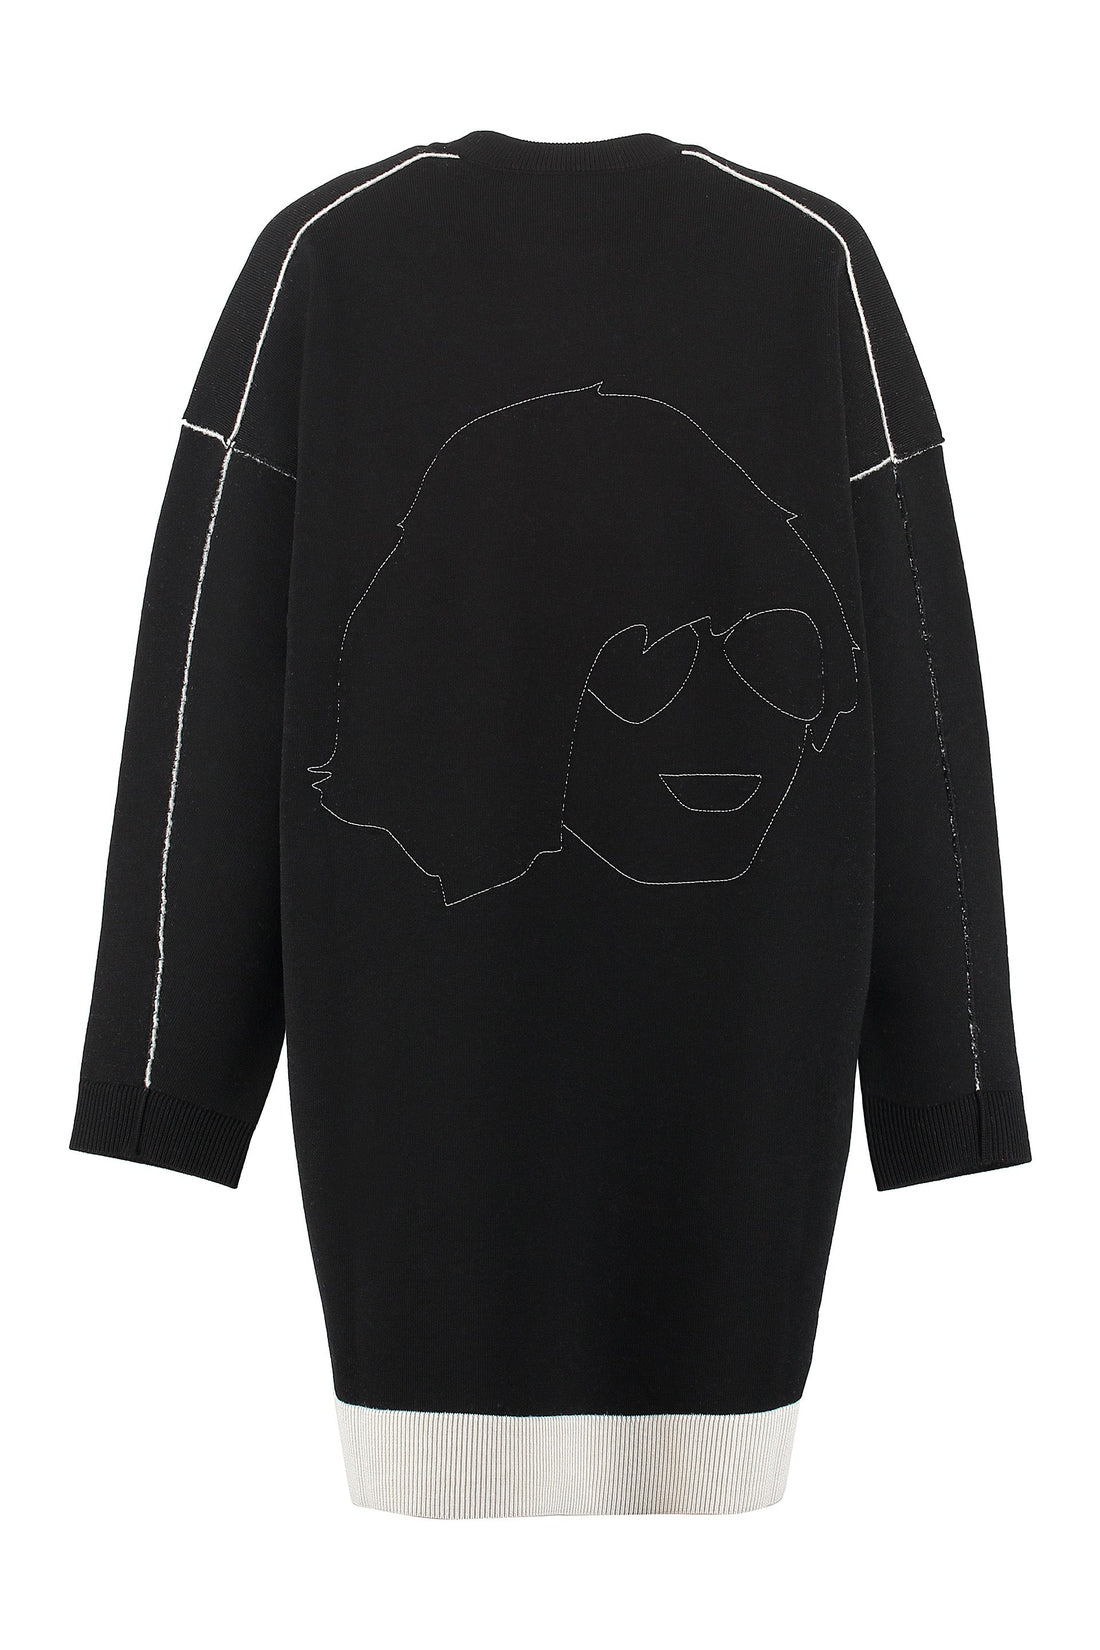 Kenzo-OUTLET-SALE-Embroidered oversize sweater-ARCHIVIST